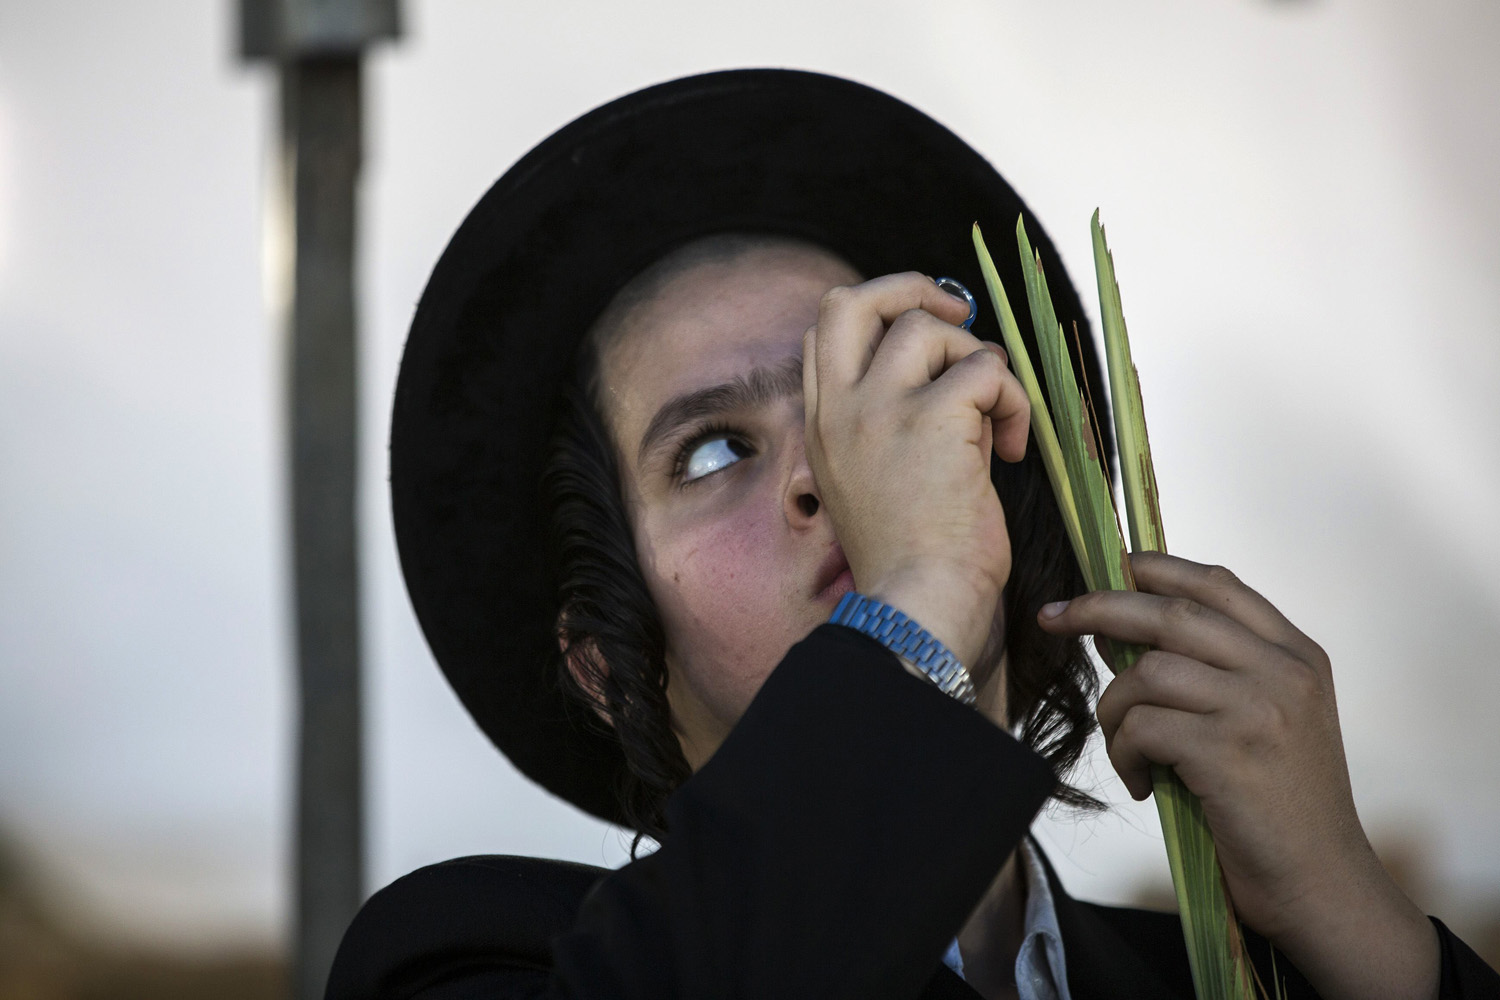 Ultra-Orthodox Jewish teen uses a magnifying glass to check a palm frond for blemishes at a market in Jerusalem